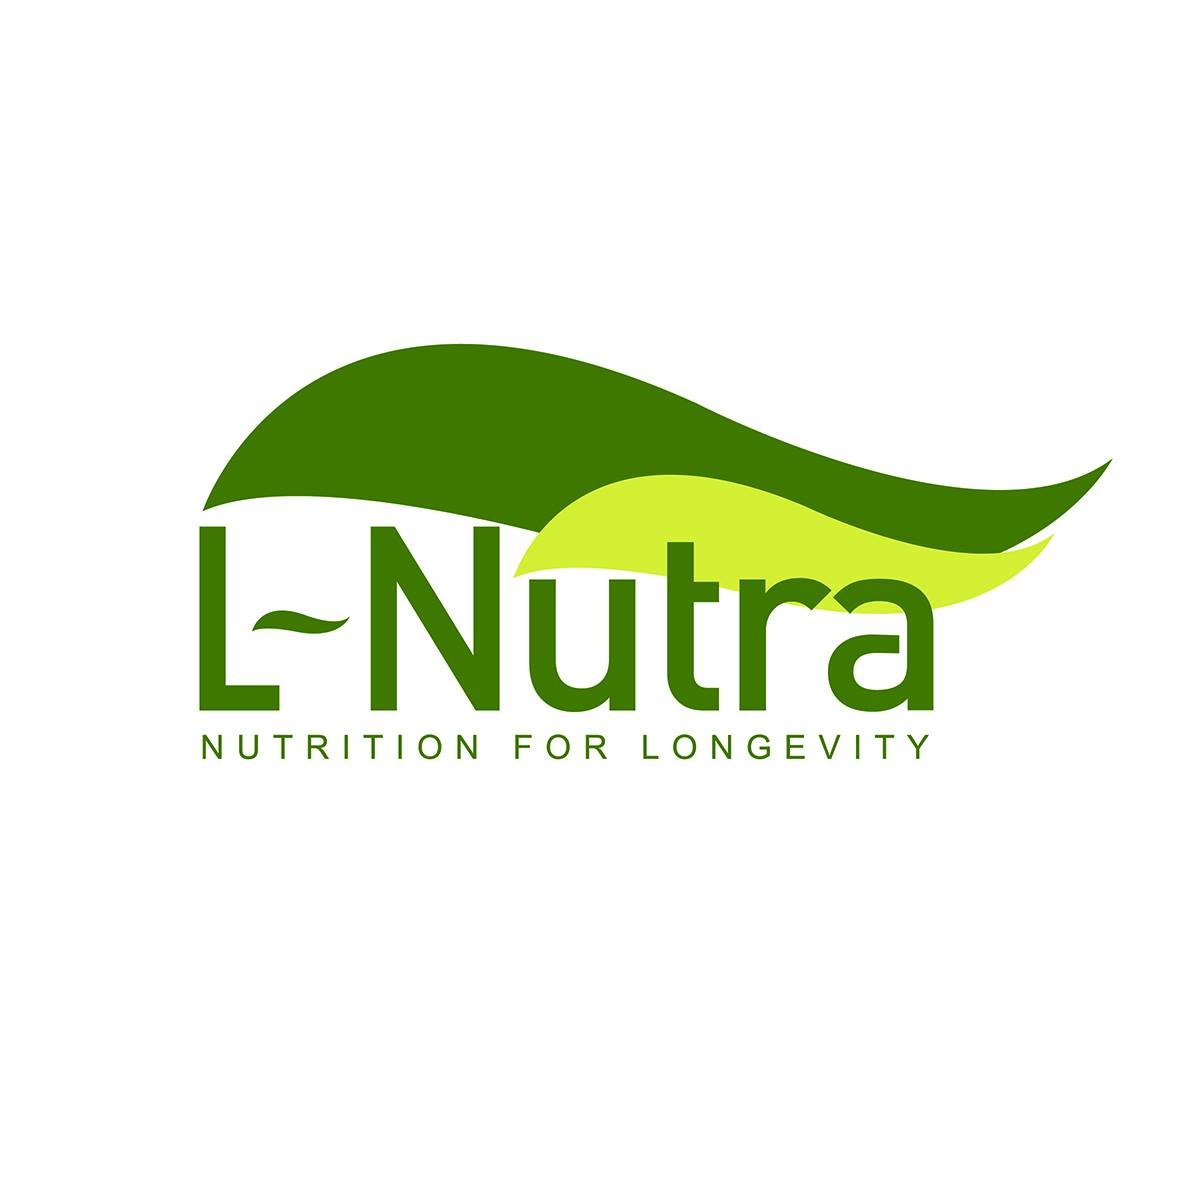 L-Nutra is the leading Nutri-Technology company, developing innovative Fasting Mimicking Diets (FMDs™). 🔬